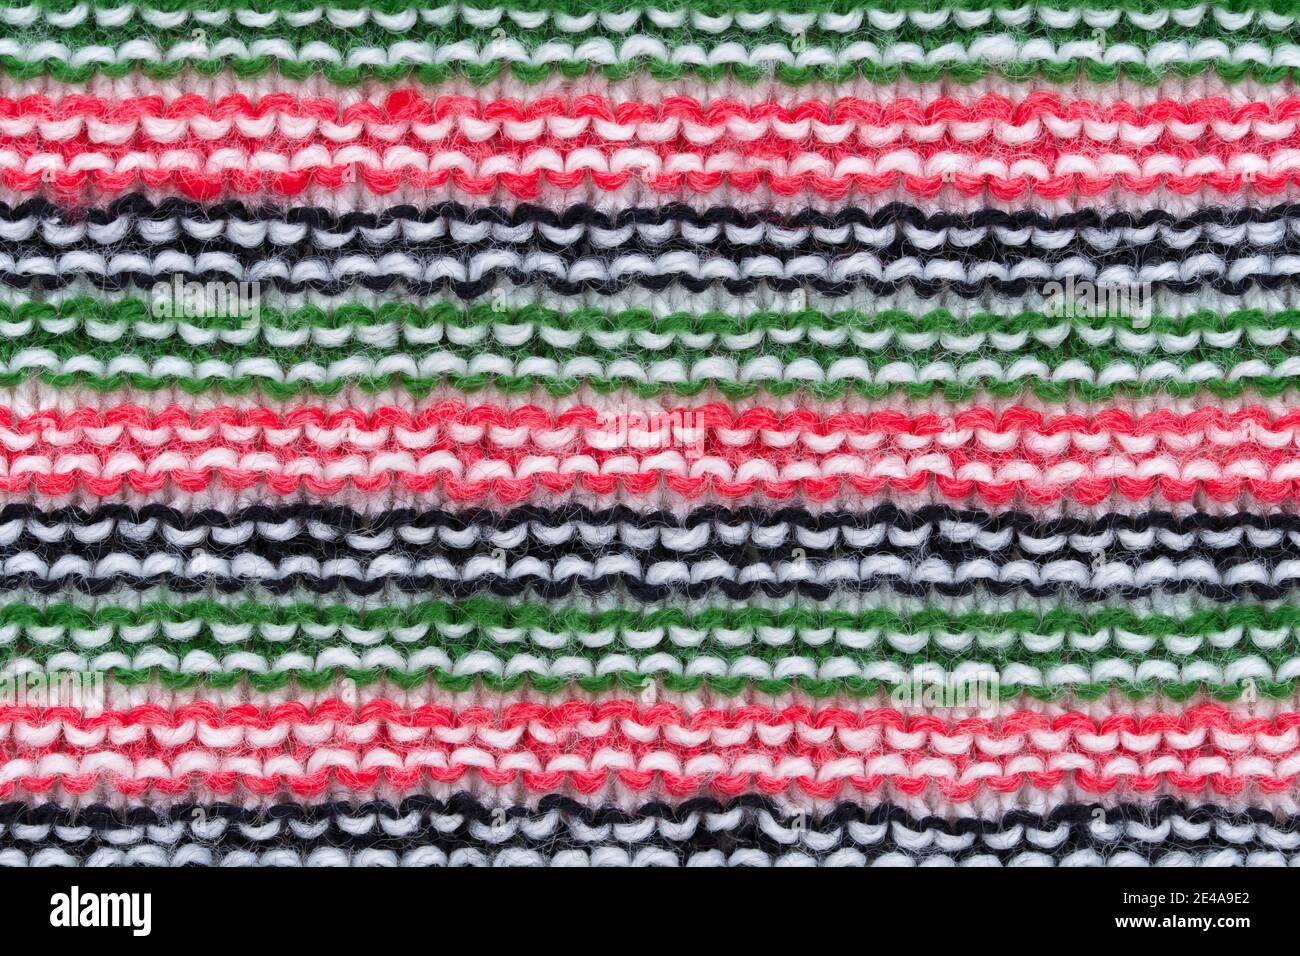 Close-up of hand made knitted stitch wool pattern in red, white, black and green. Stock Photo